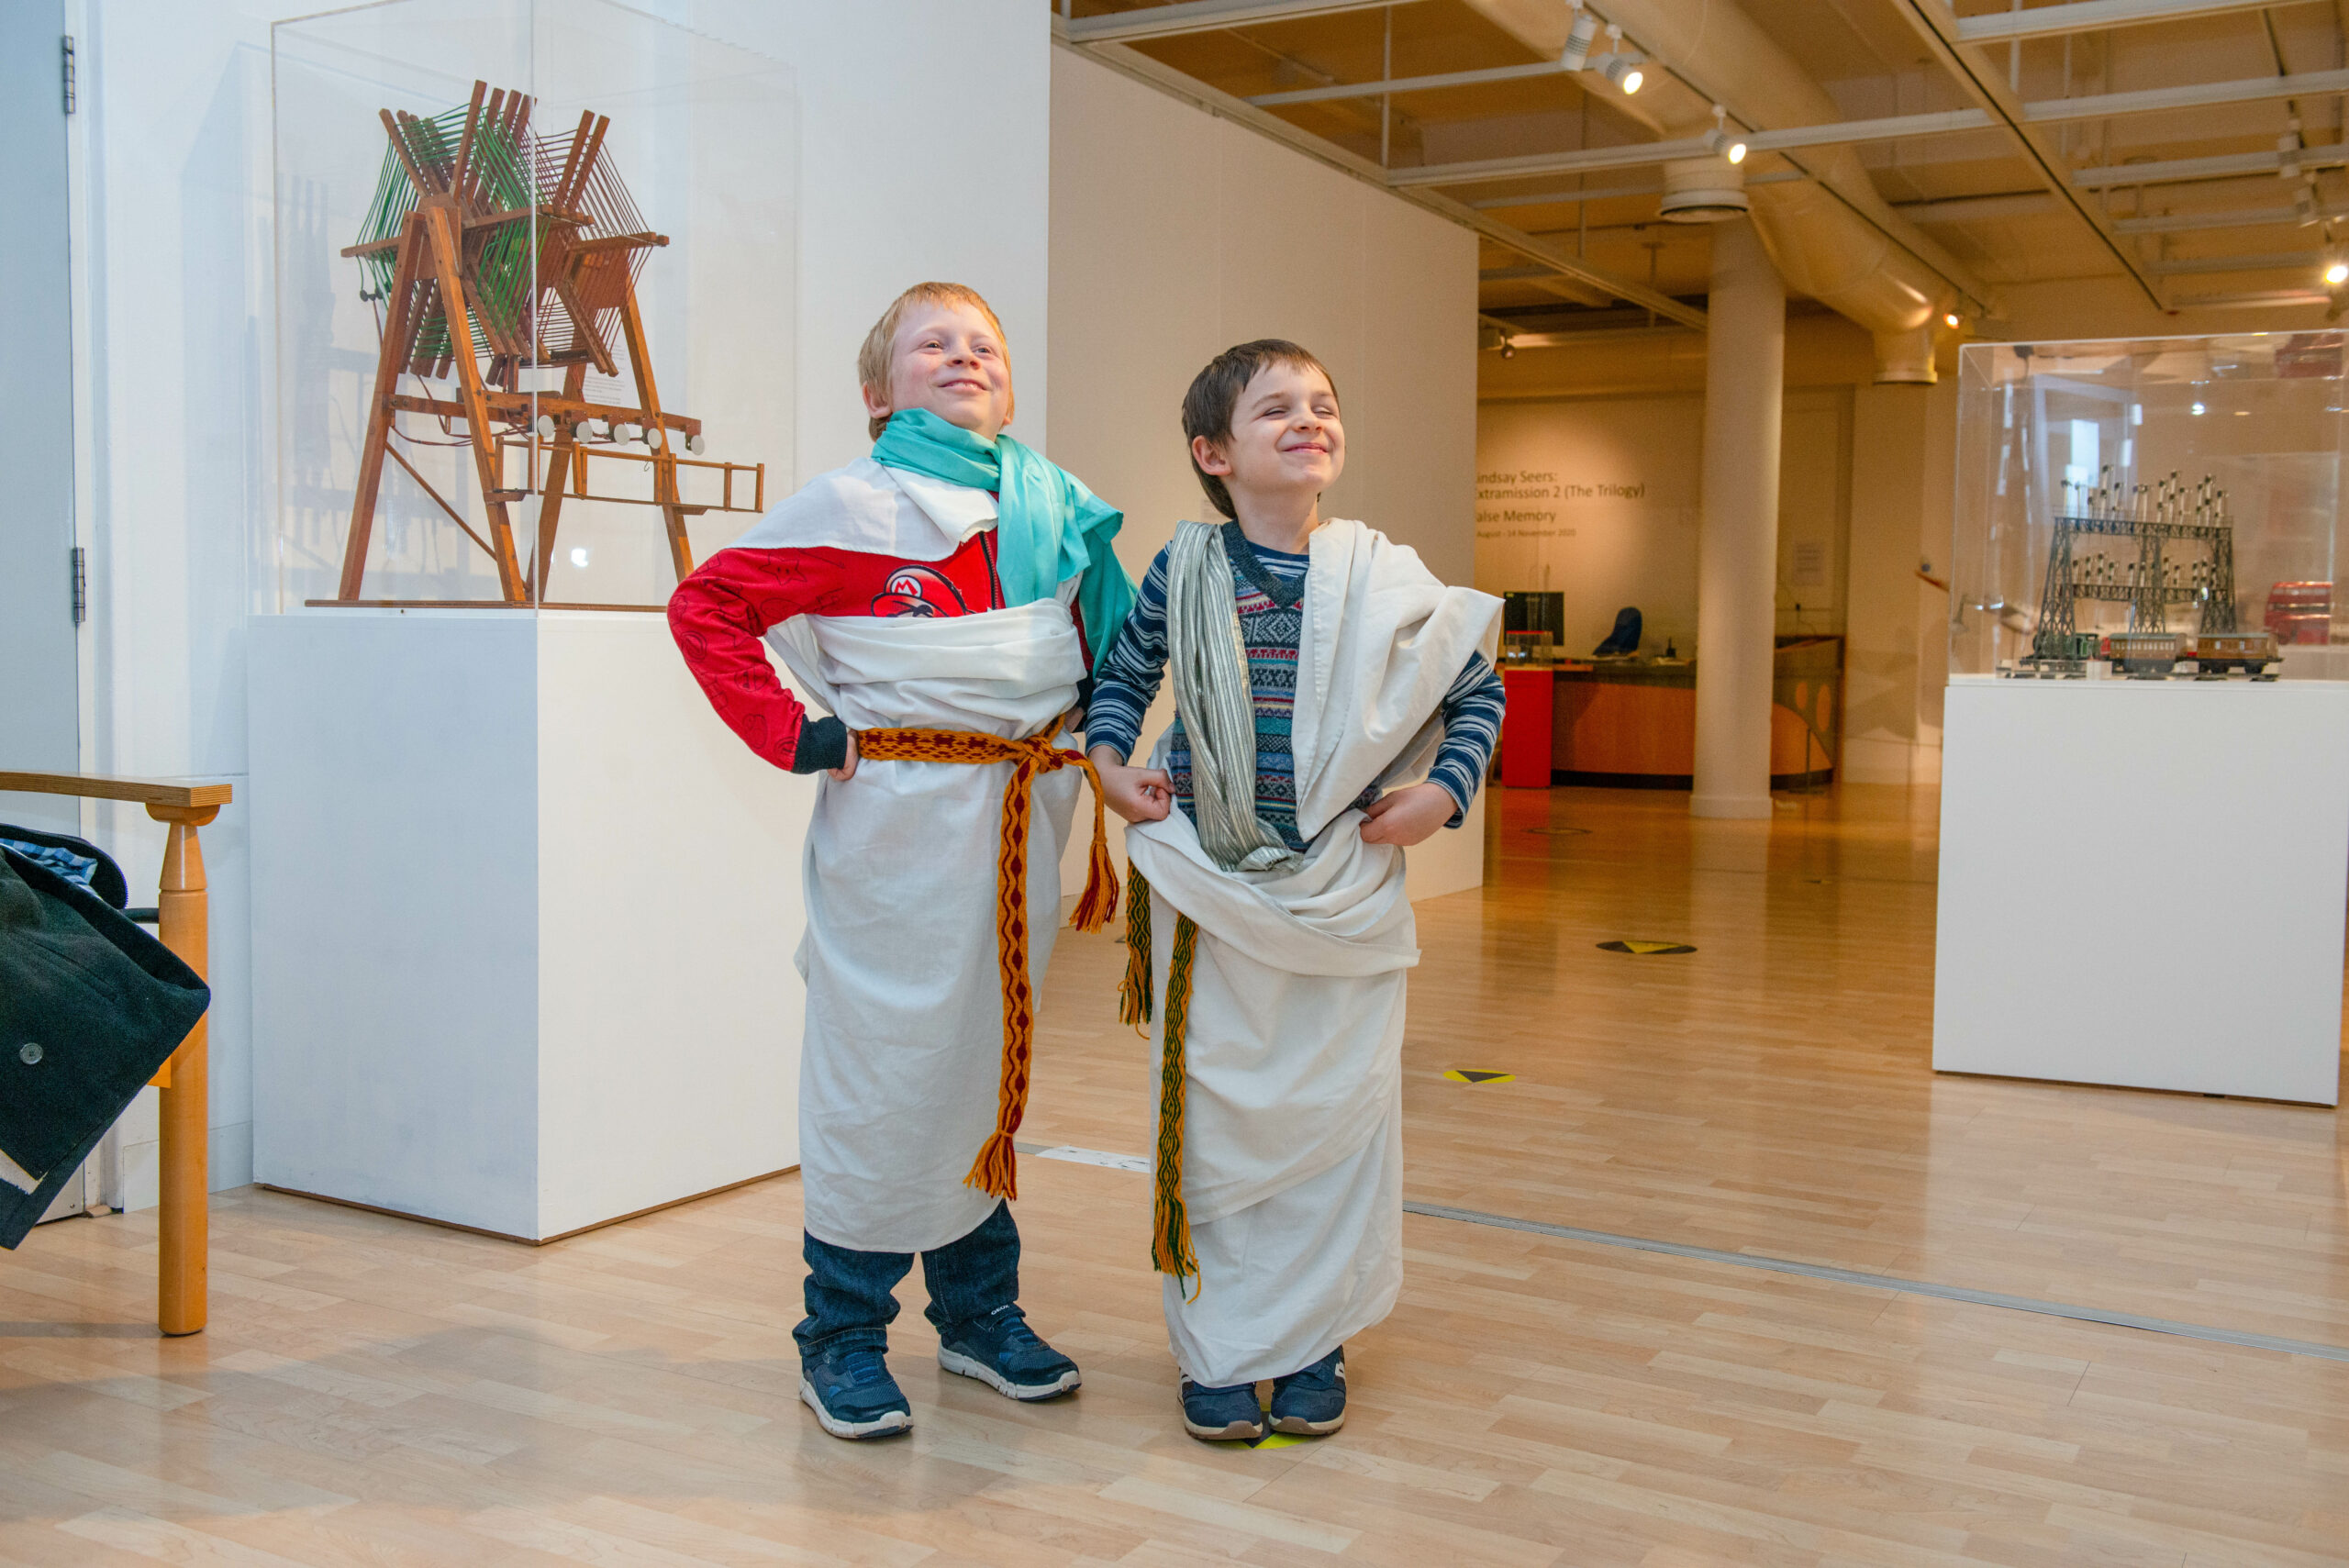 Two children stand posing and smiling in a museum space. They have Roman style clothing items on top of their normal clothes.